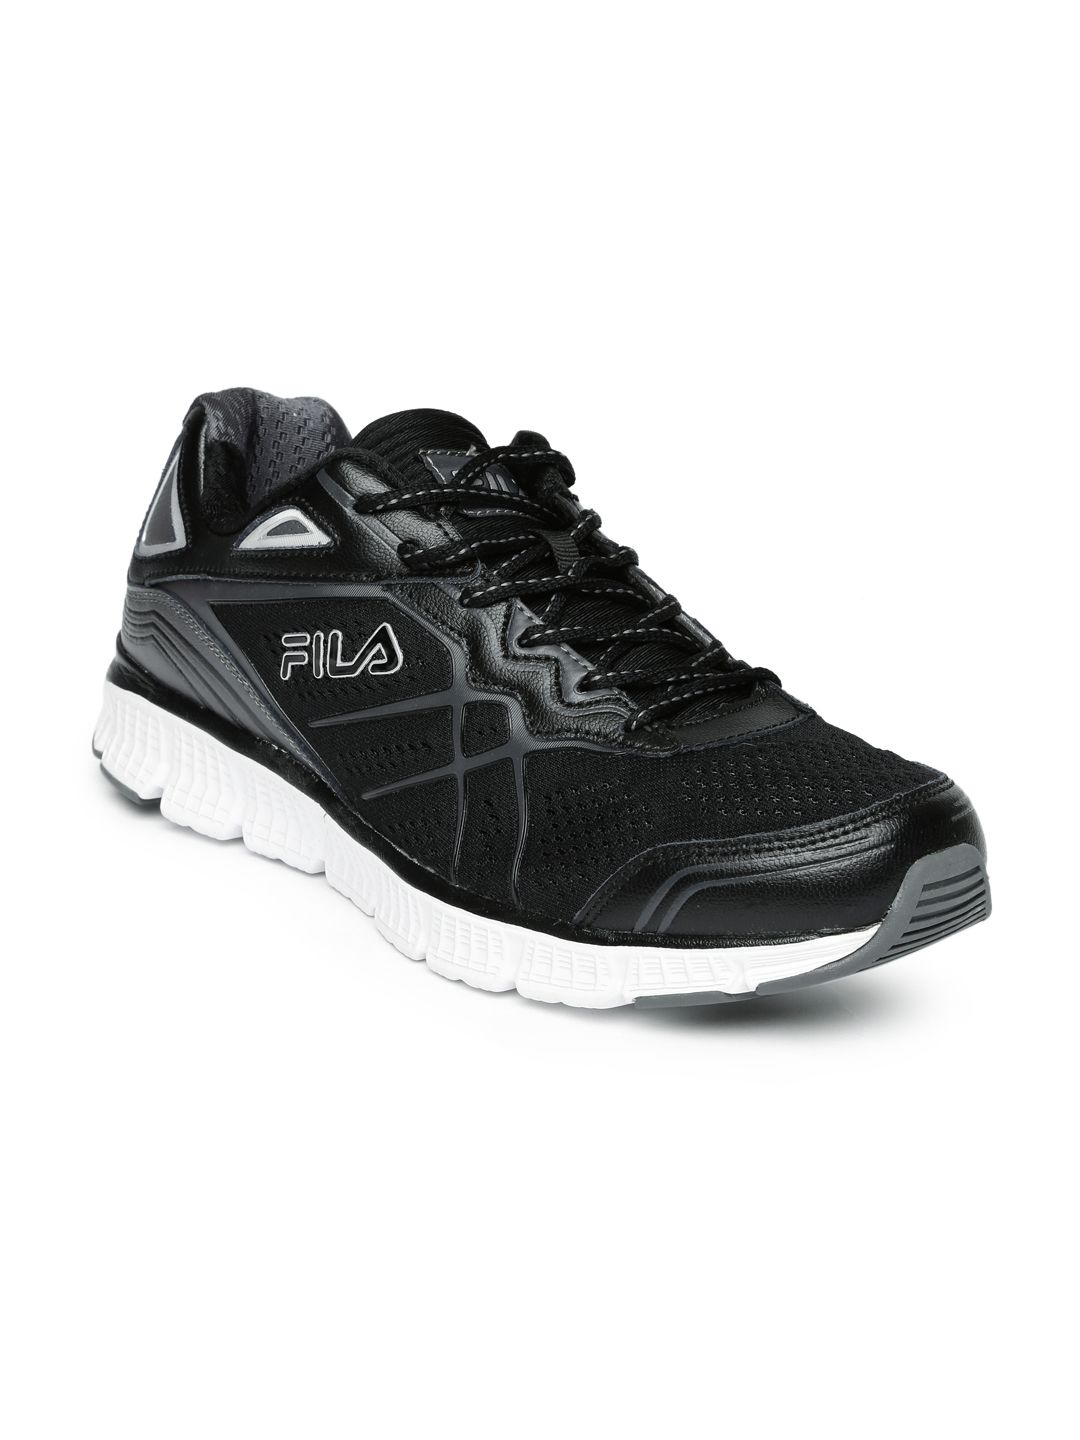 Fila Explosion BLACK RUNNING SHOES for Men online in India at Best ...